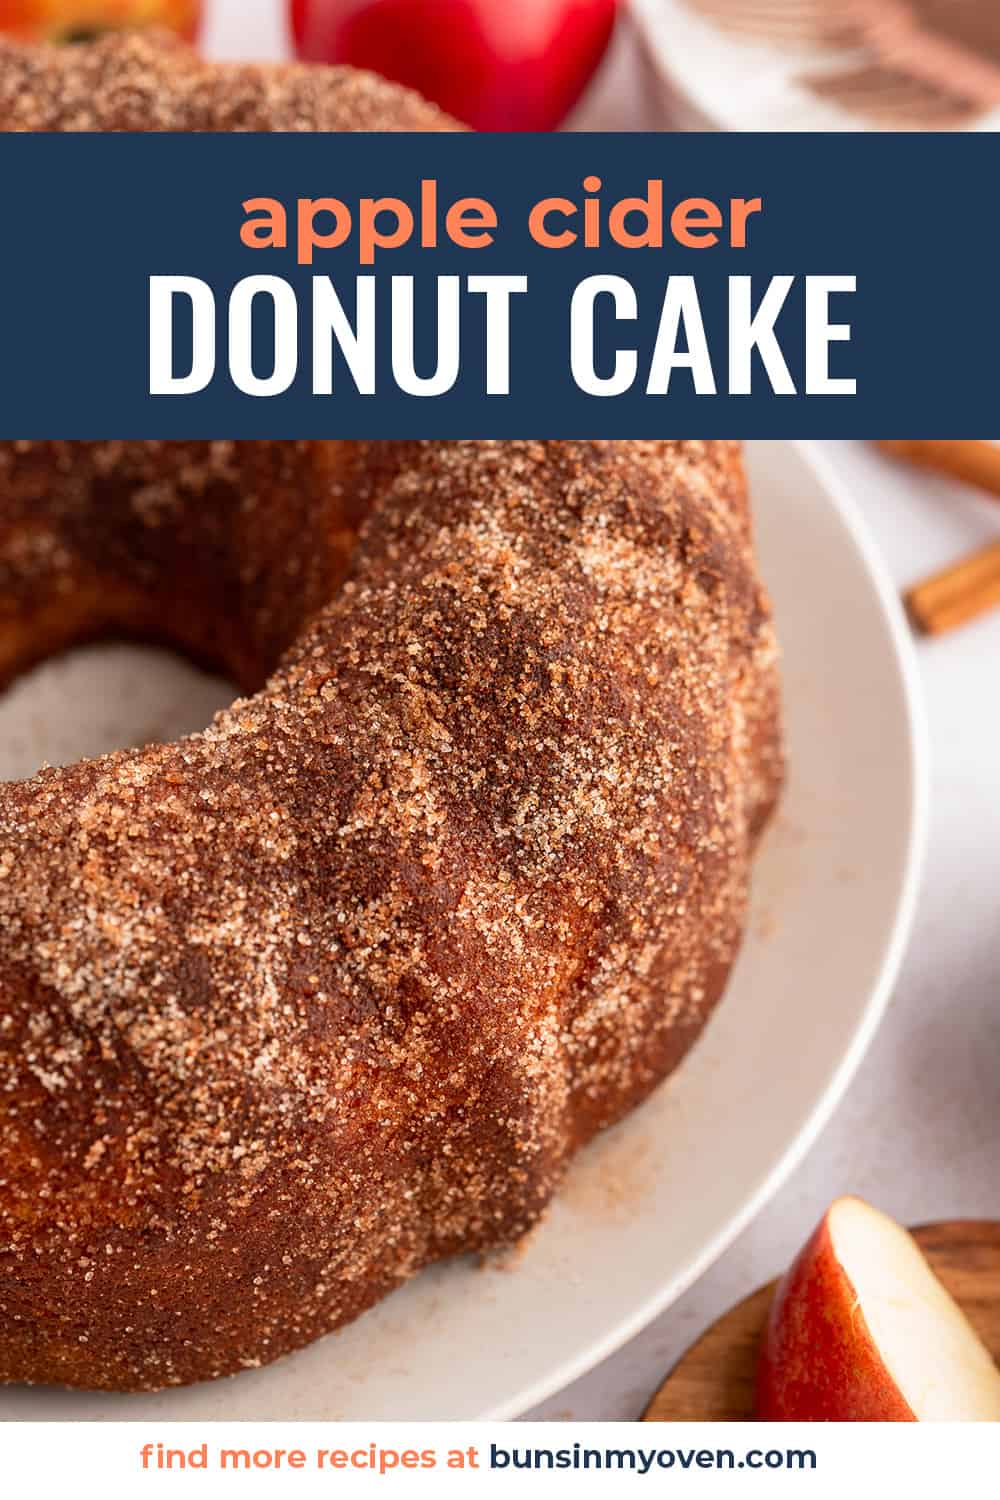 Apple cider donut cake on white plate with text for Pinterest.